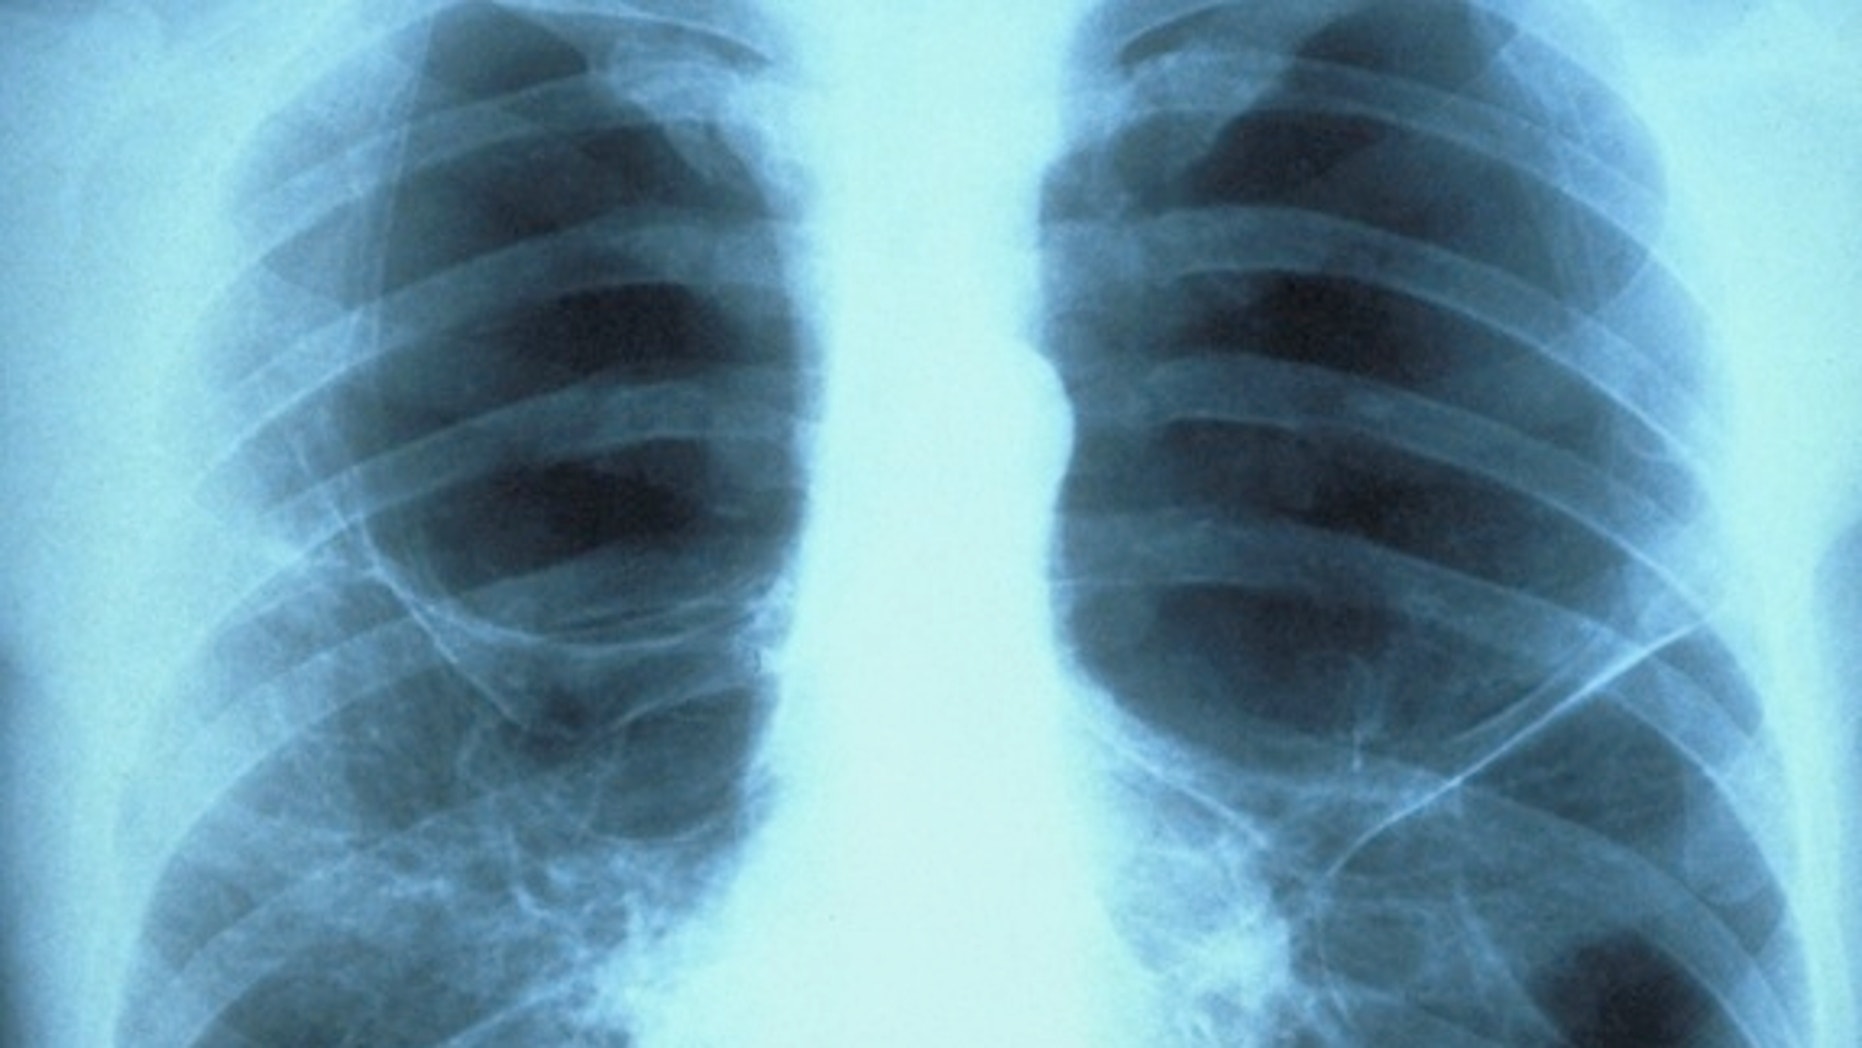 Lung cancer cases on the rise in non-smokers, study suggests | Fox News